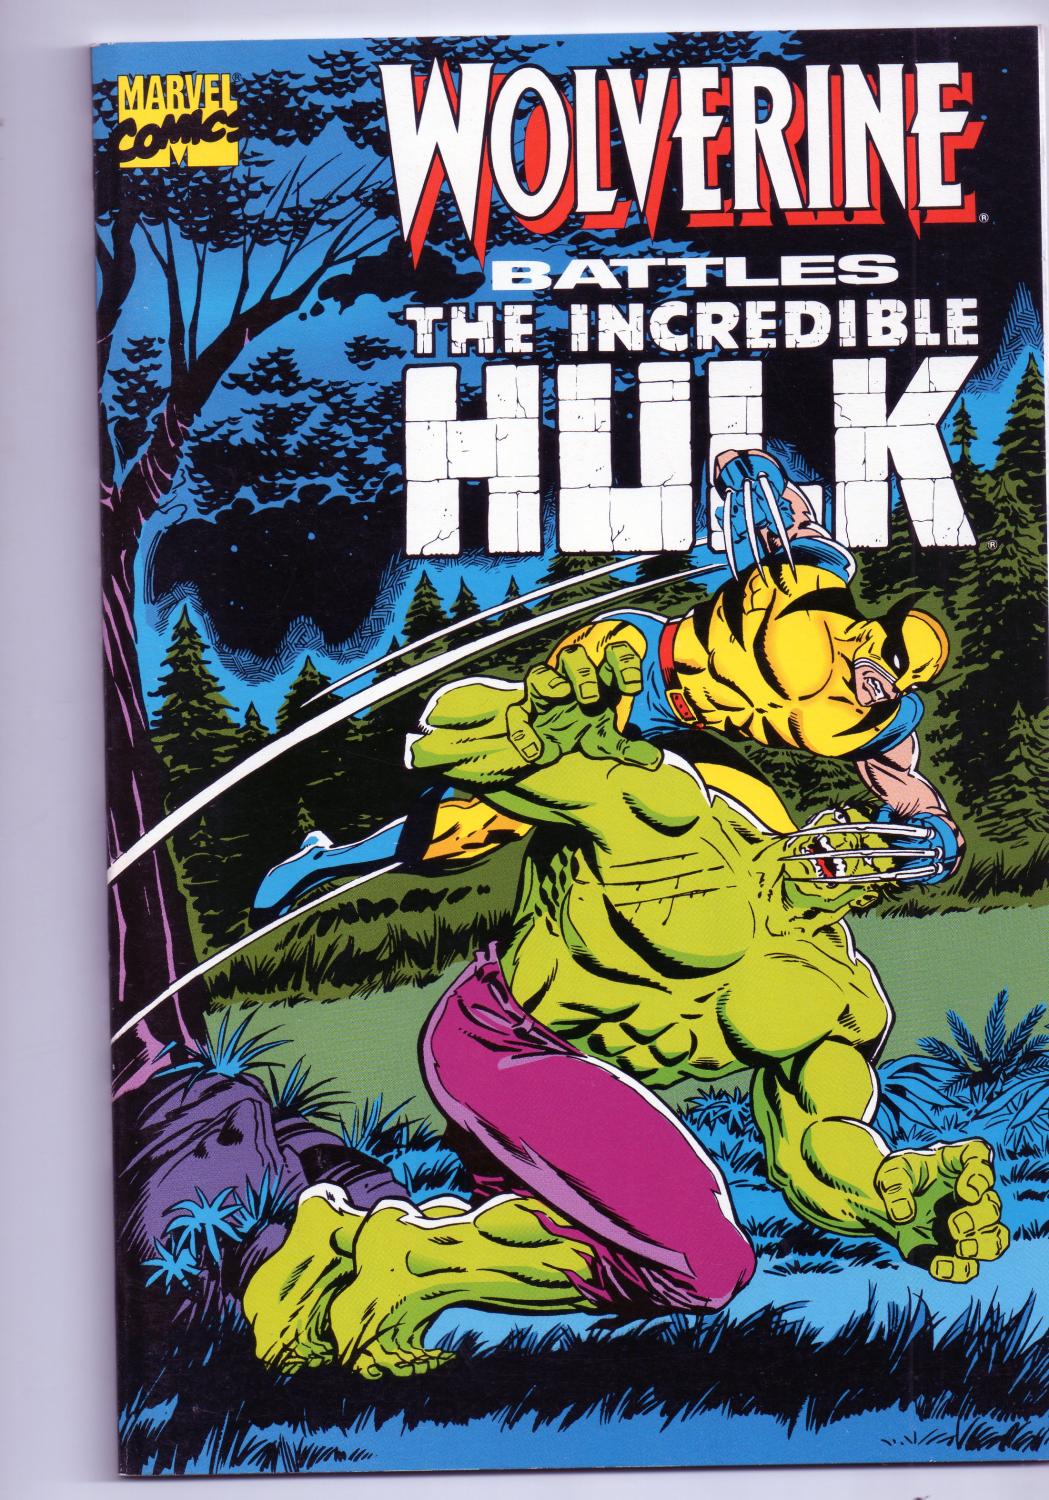 Stan Lee Presents Wolverine Battles the Incredible Hulk (Comic Book) by  Wein, Len: As New Pictorial Laminated Card (1989) 1st Edition | Brian  Corrigan